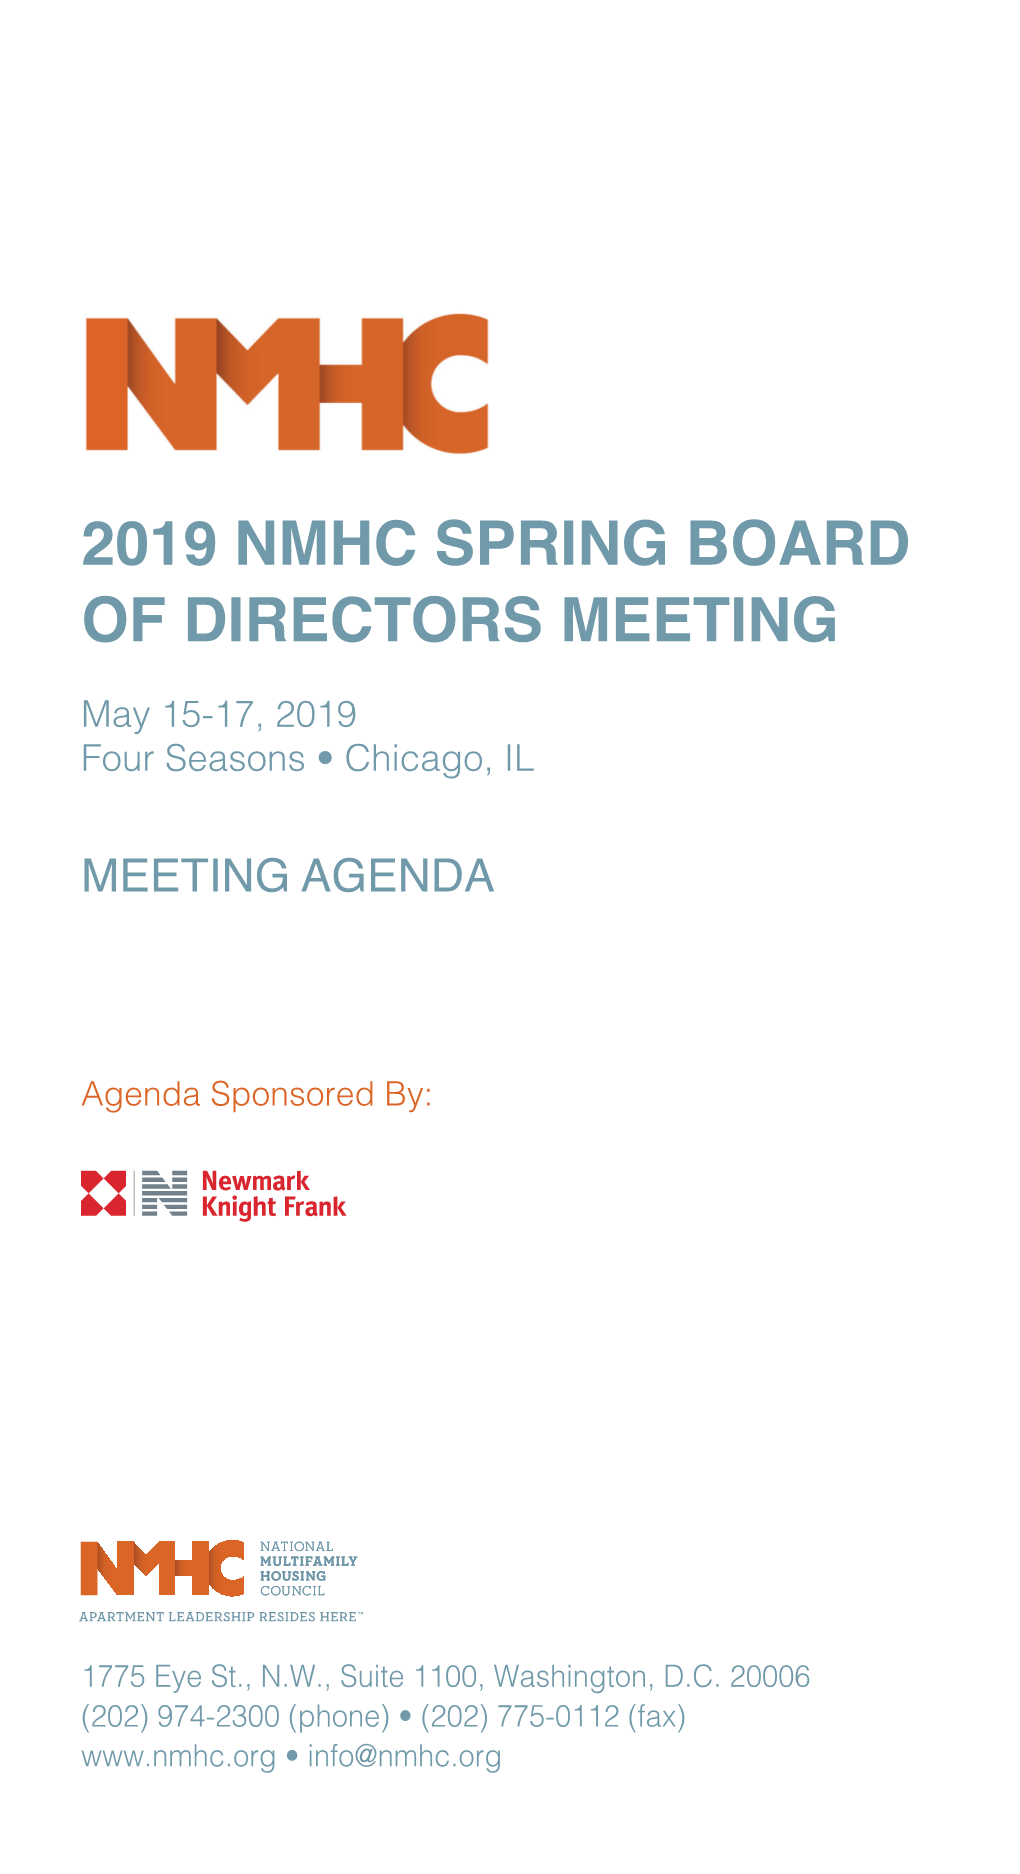 2019 Nmhc Spring Board of Directors Meeting